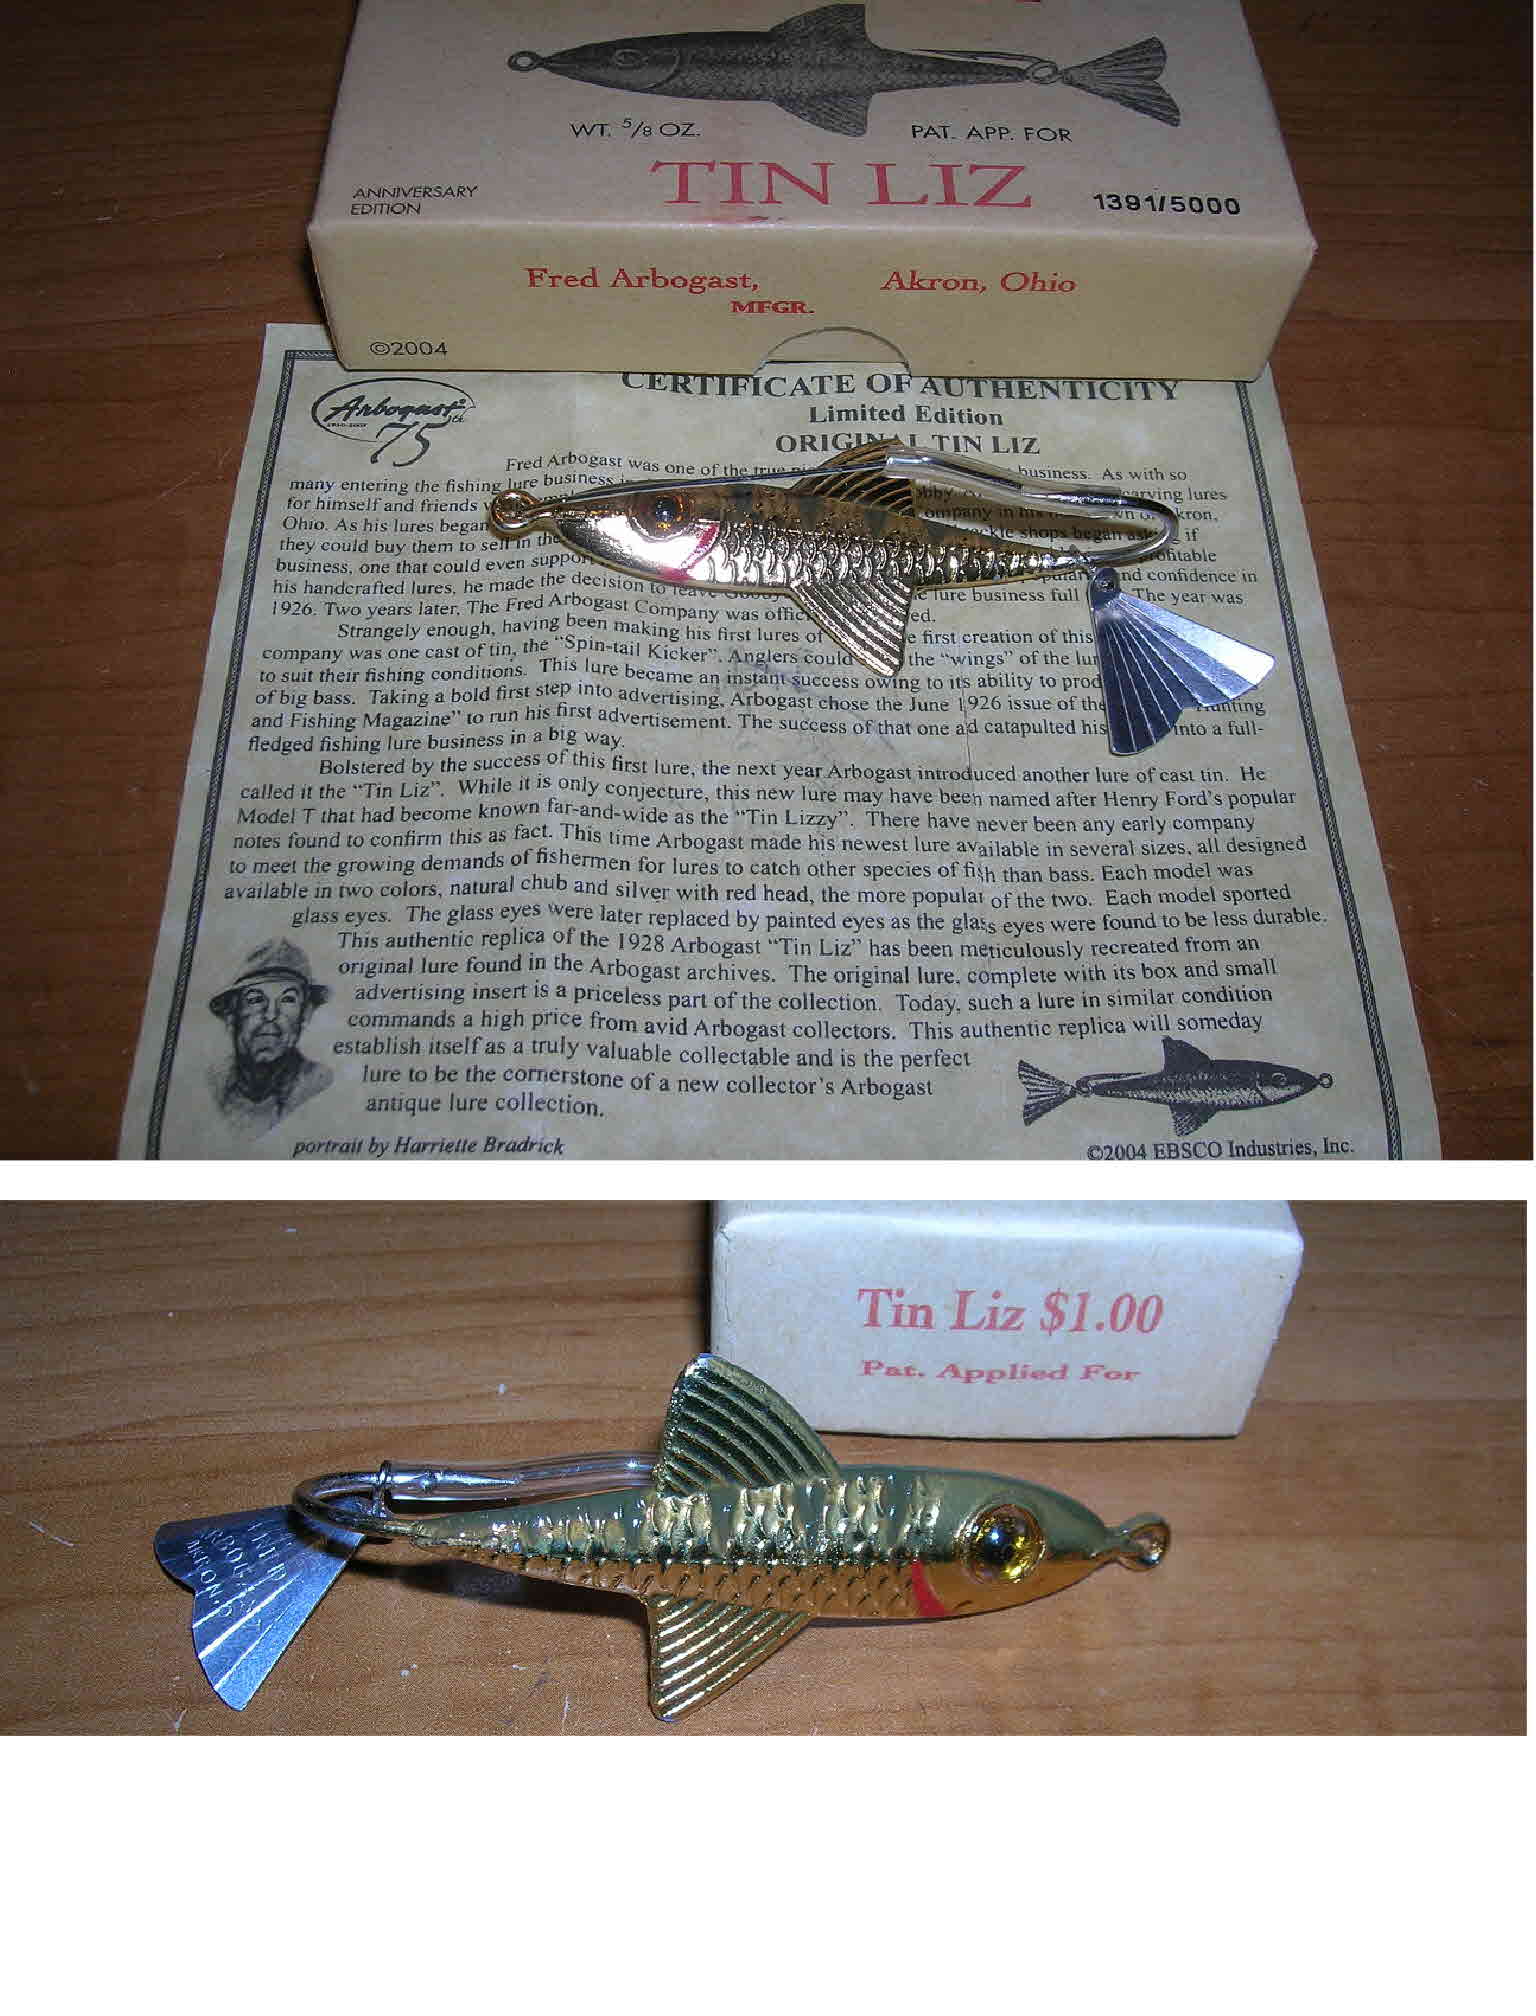 https://www.fishingcollectables.com/images/lm085.jpg